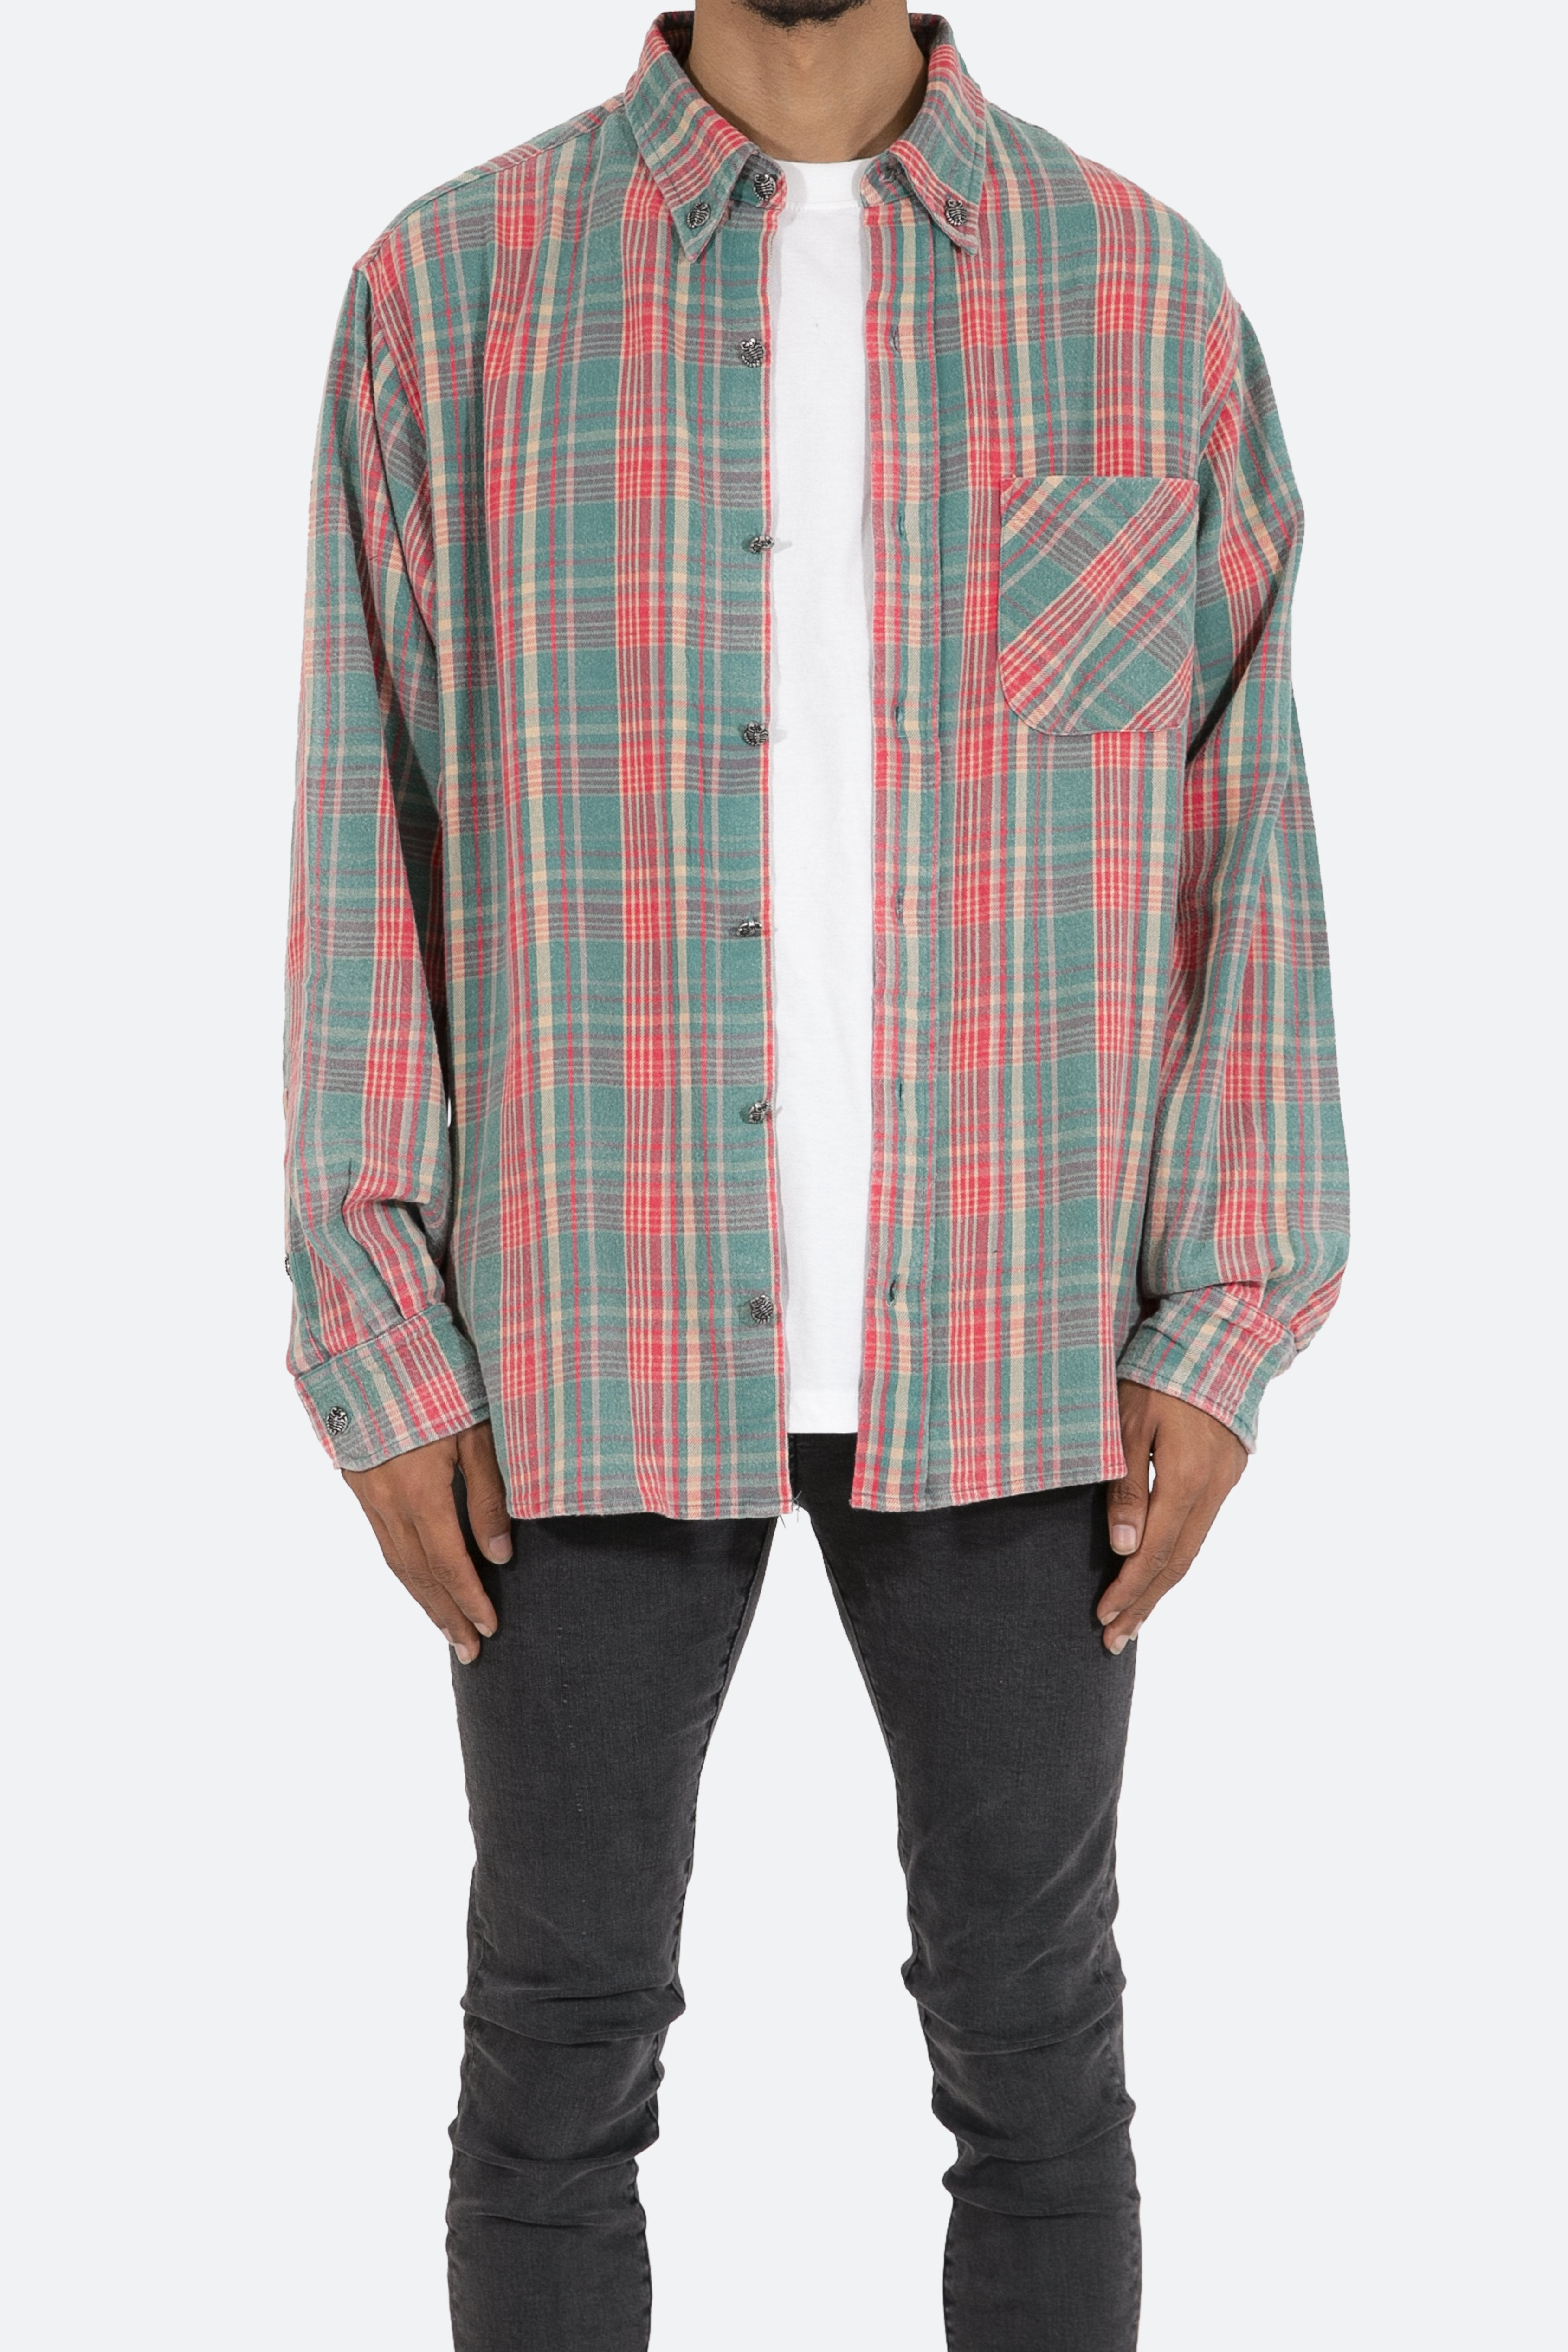 Image of Scorpion Vintage Flannel - Red/Blue